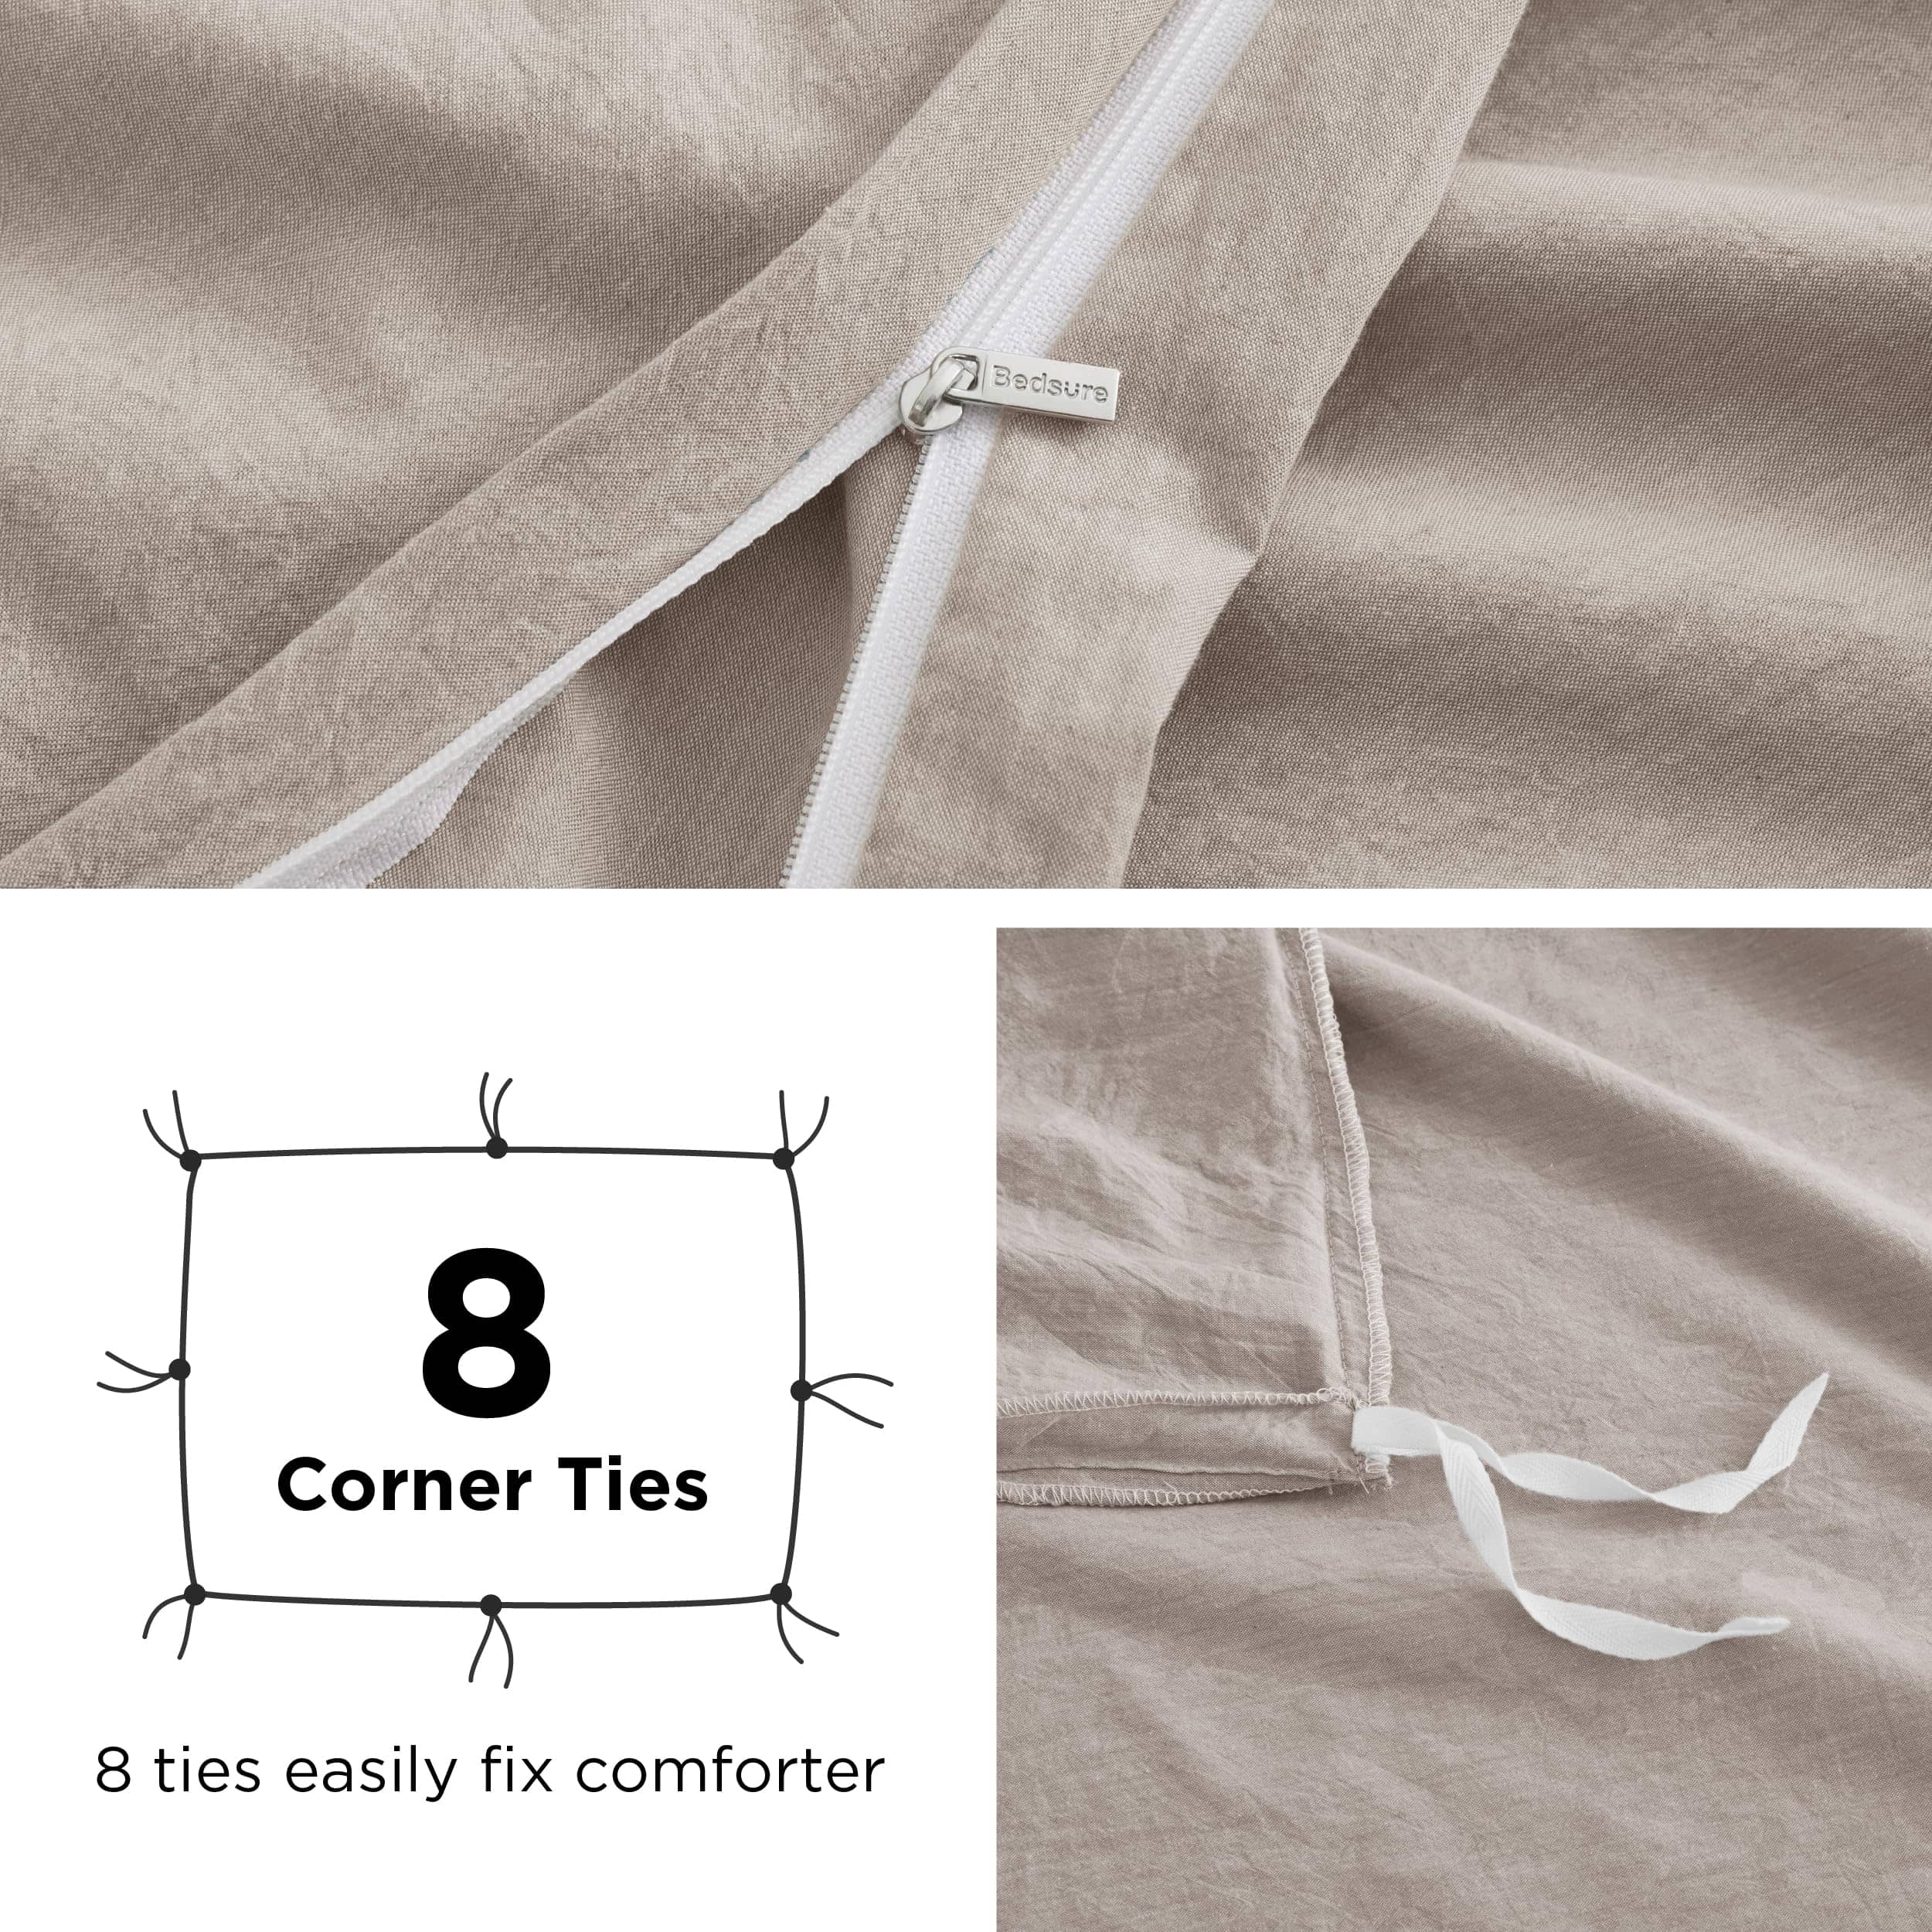 100% Washed Cotton Duvet Cover